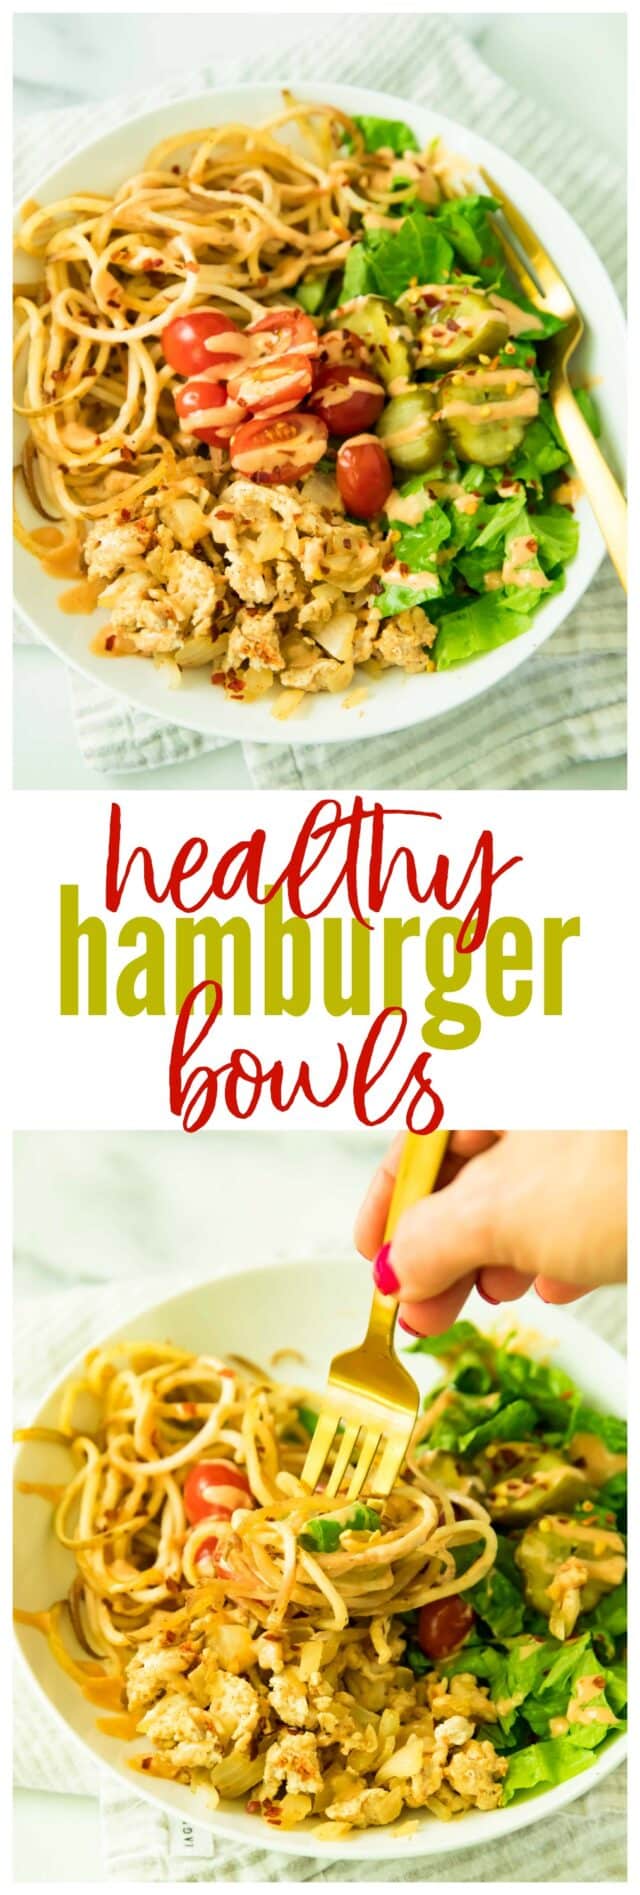 When you're craving a burger, but trying to be good, whip up some tasty Healthy Hamburger Bowls! They're so simple and take just 30 minutes to construct!